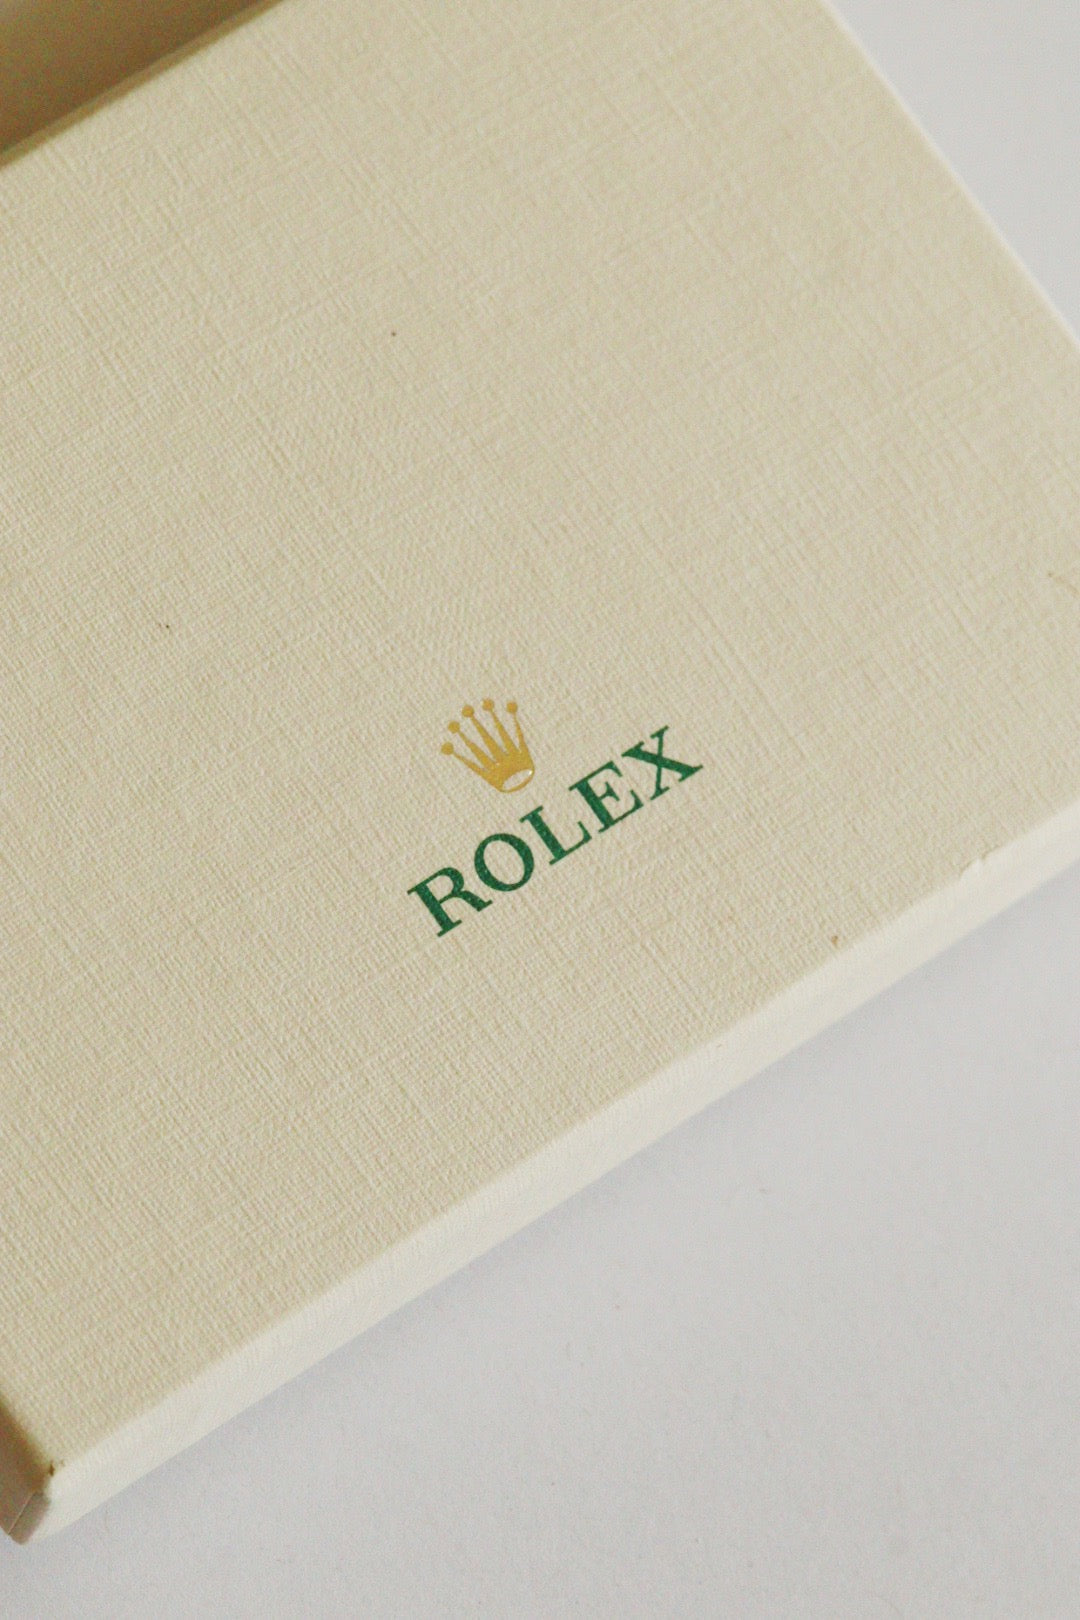 Leather Rolex card holder